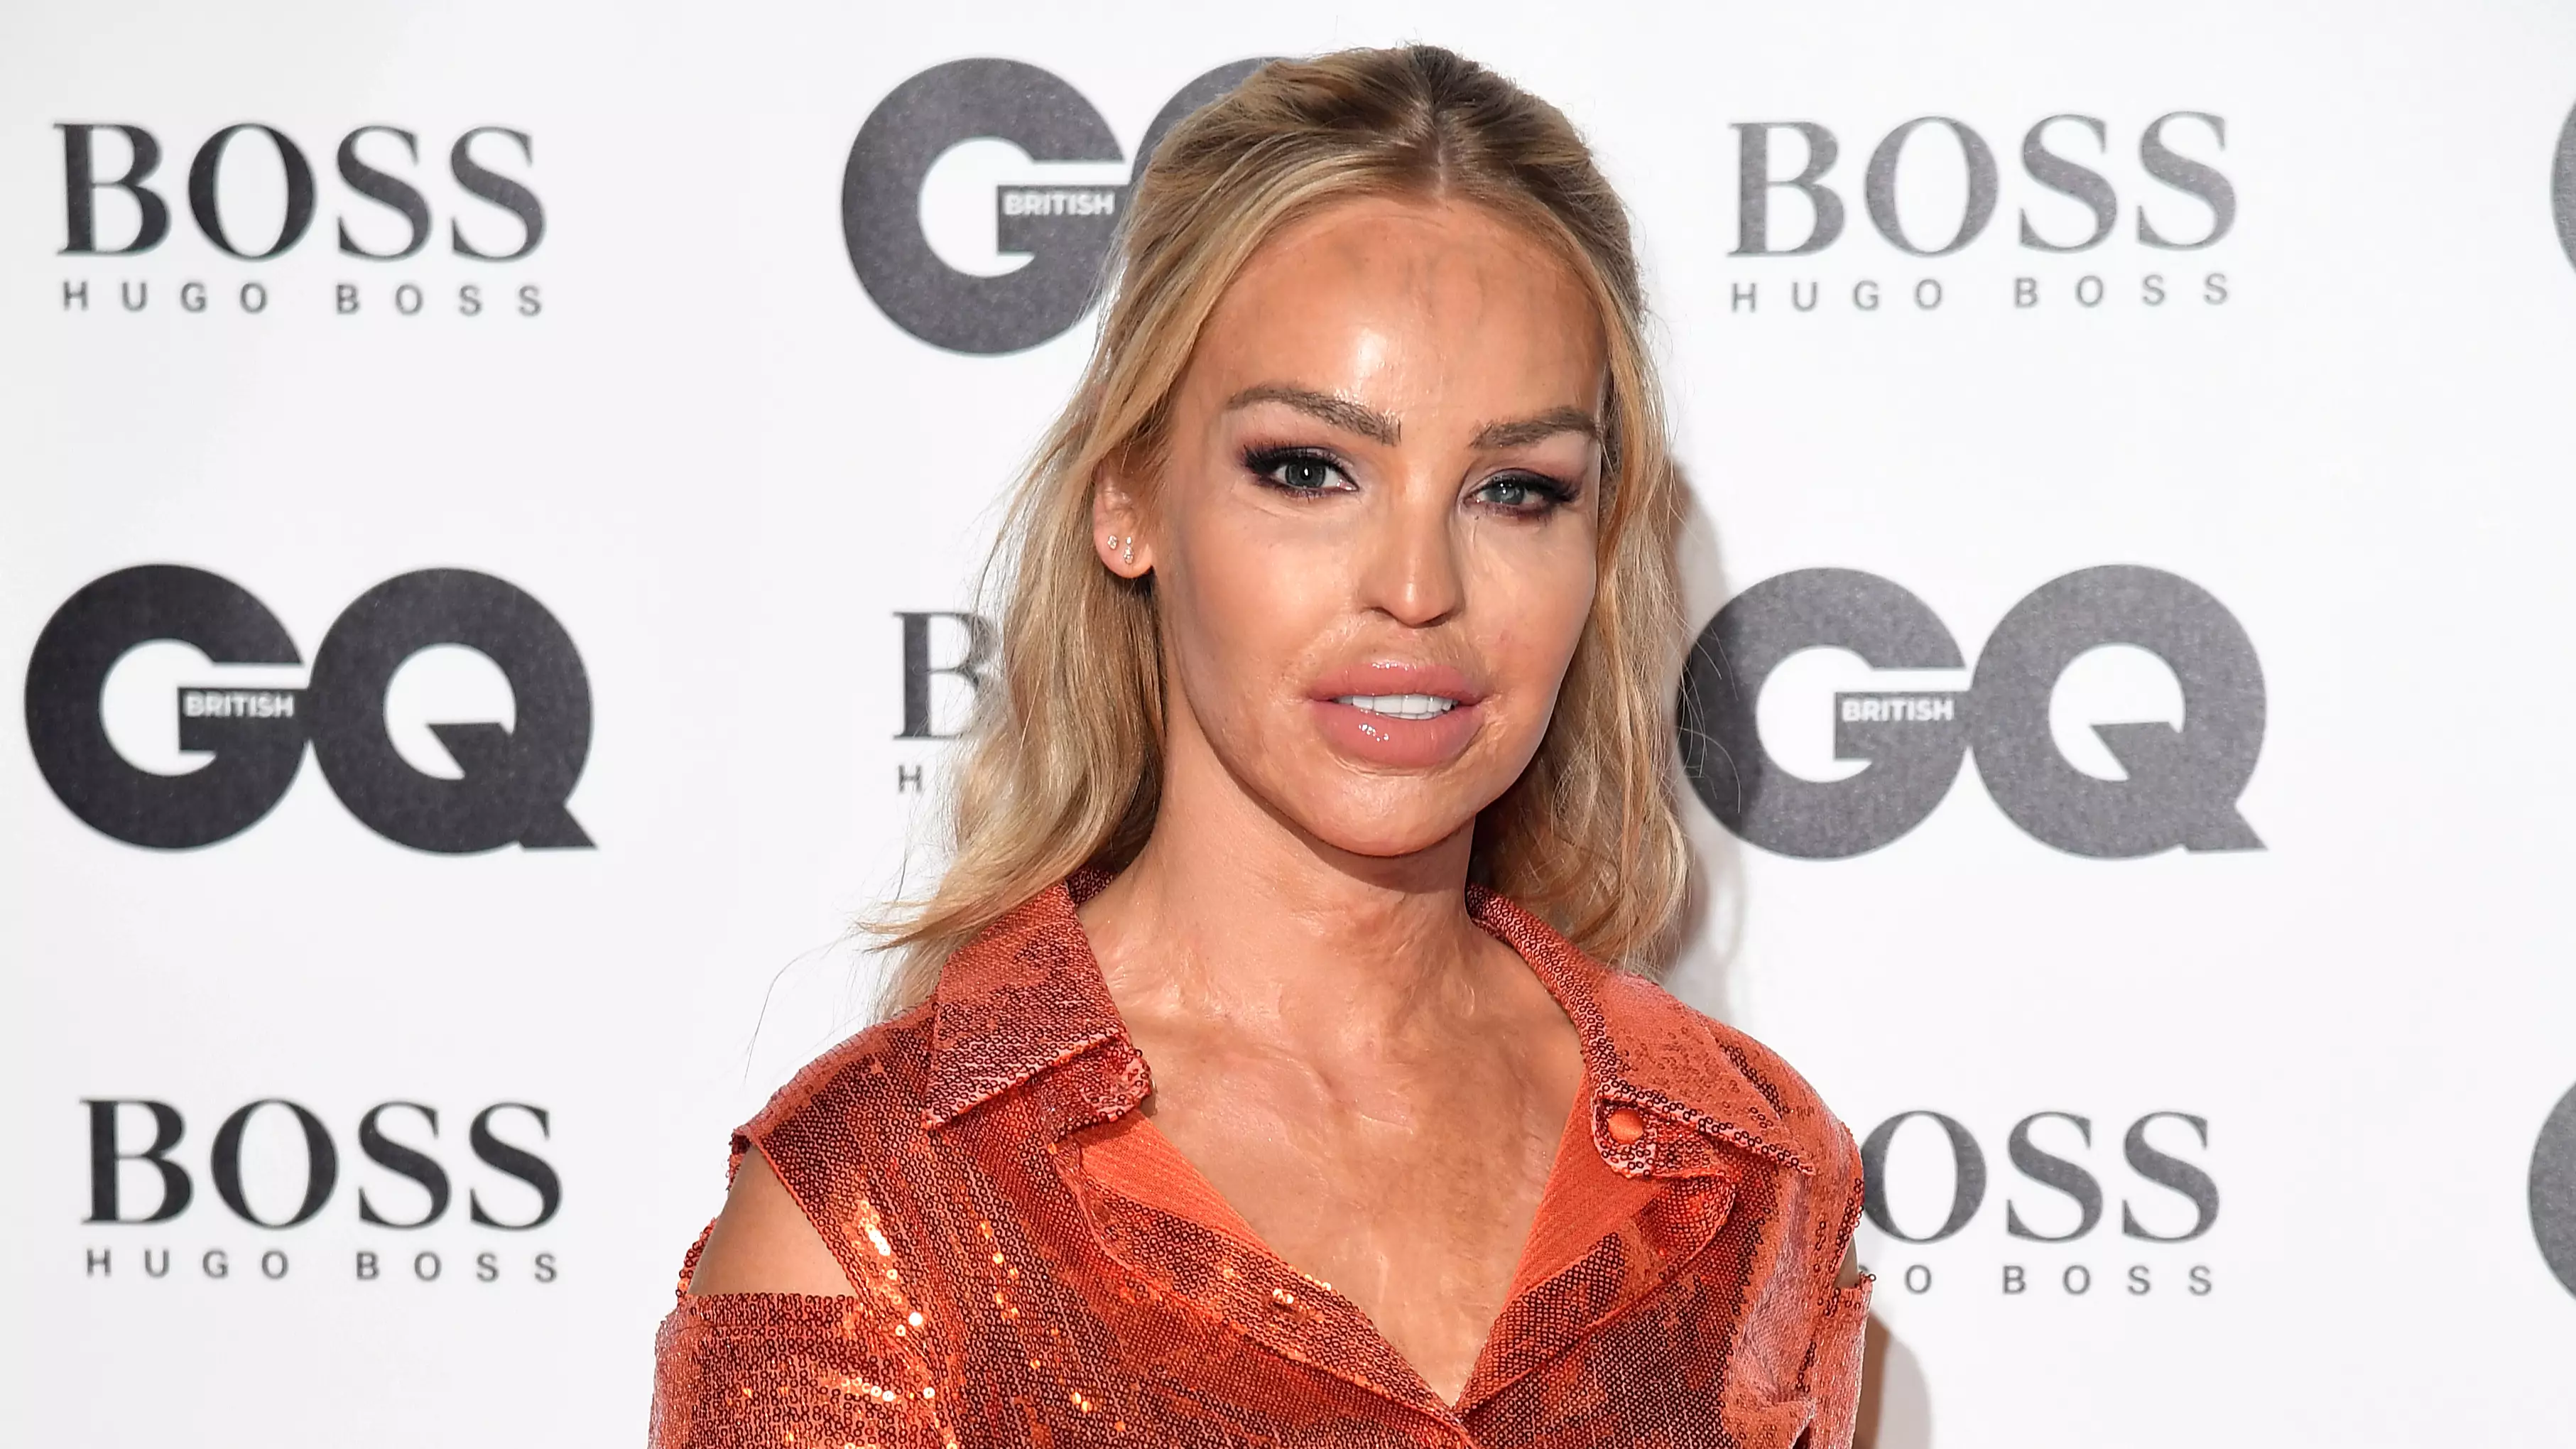 Katie Piper's Acid Attacker Stefan Sylvestre Released From Prison